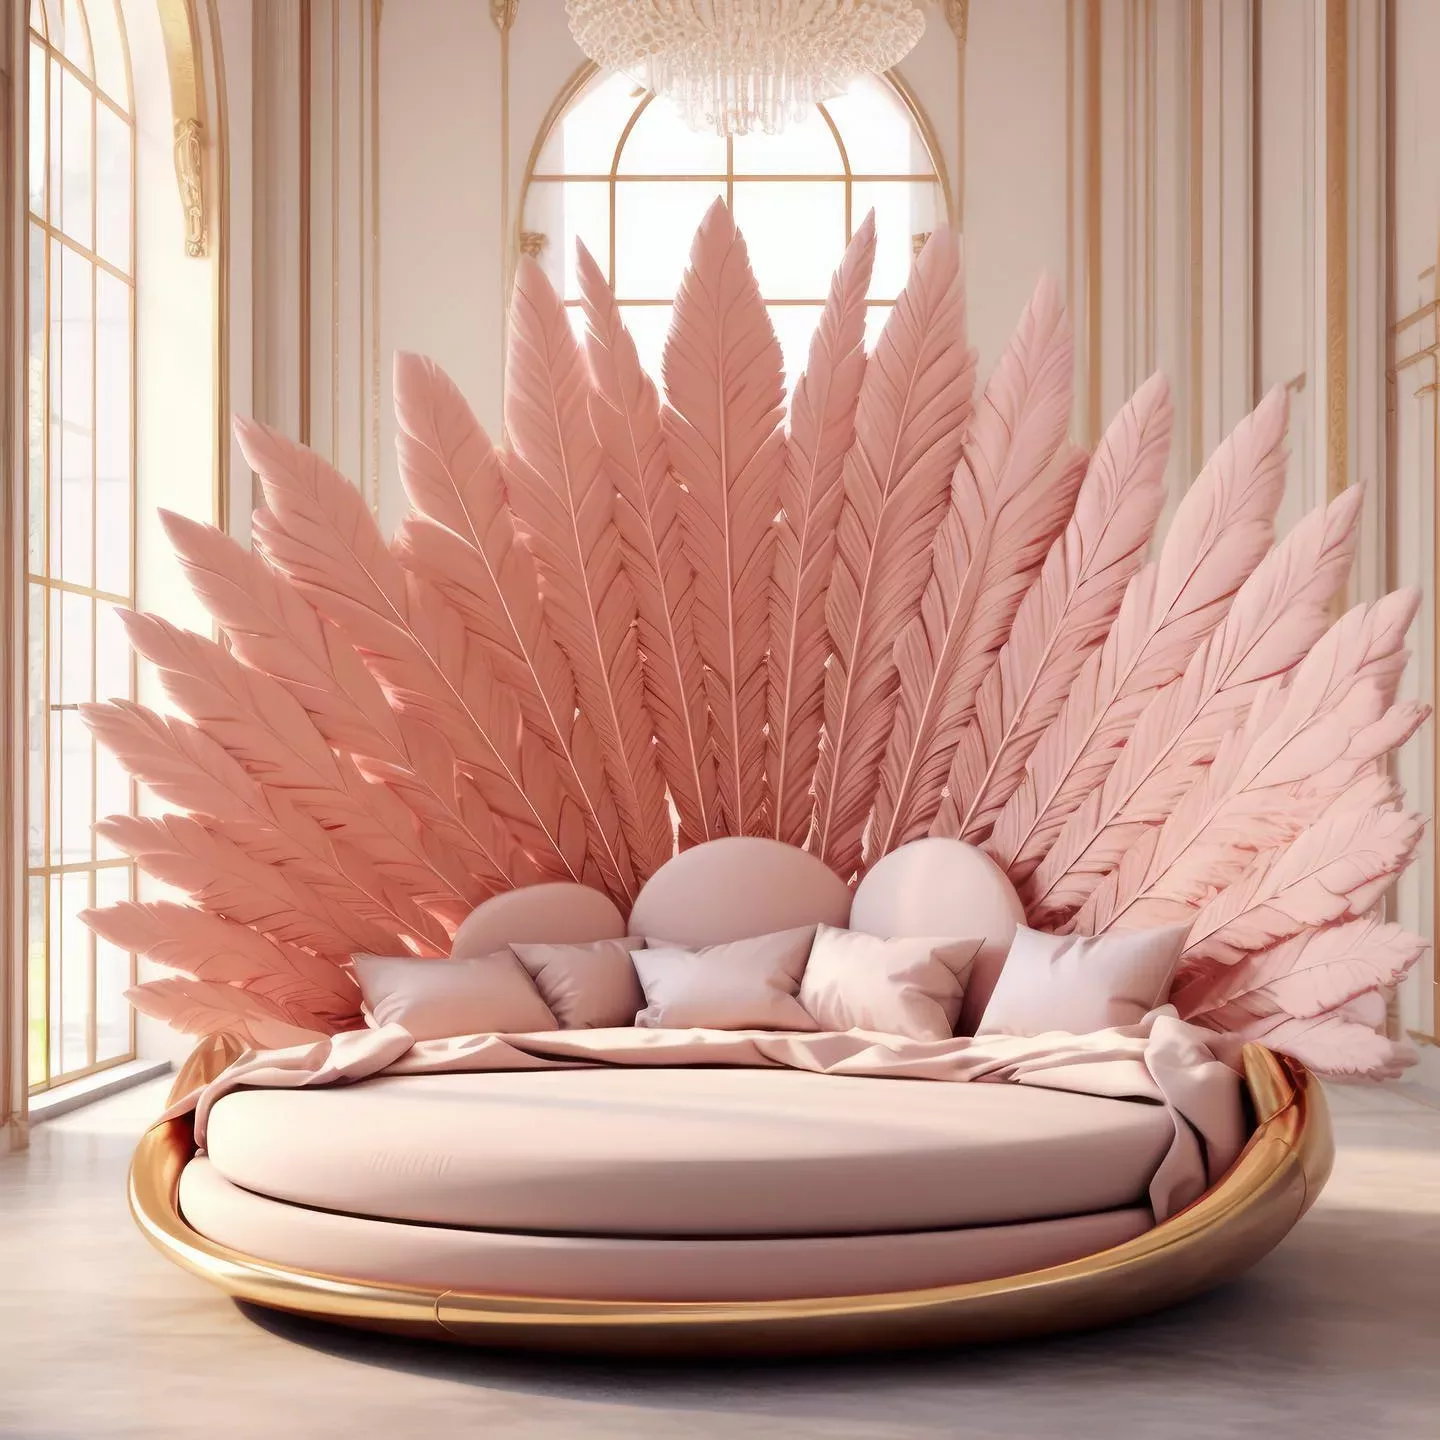 Sleep Like Royalty: The Enchanting Beauty of a Pink Swan Bed